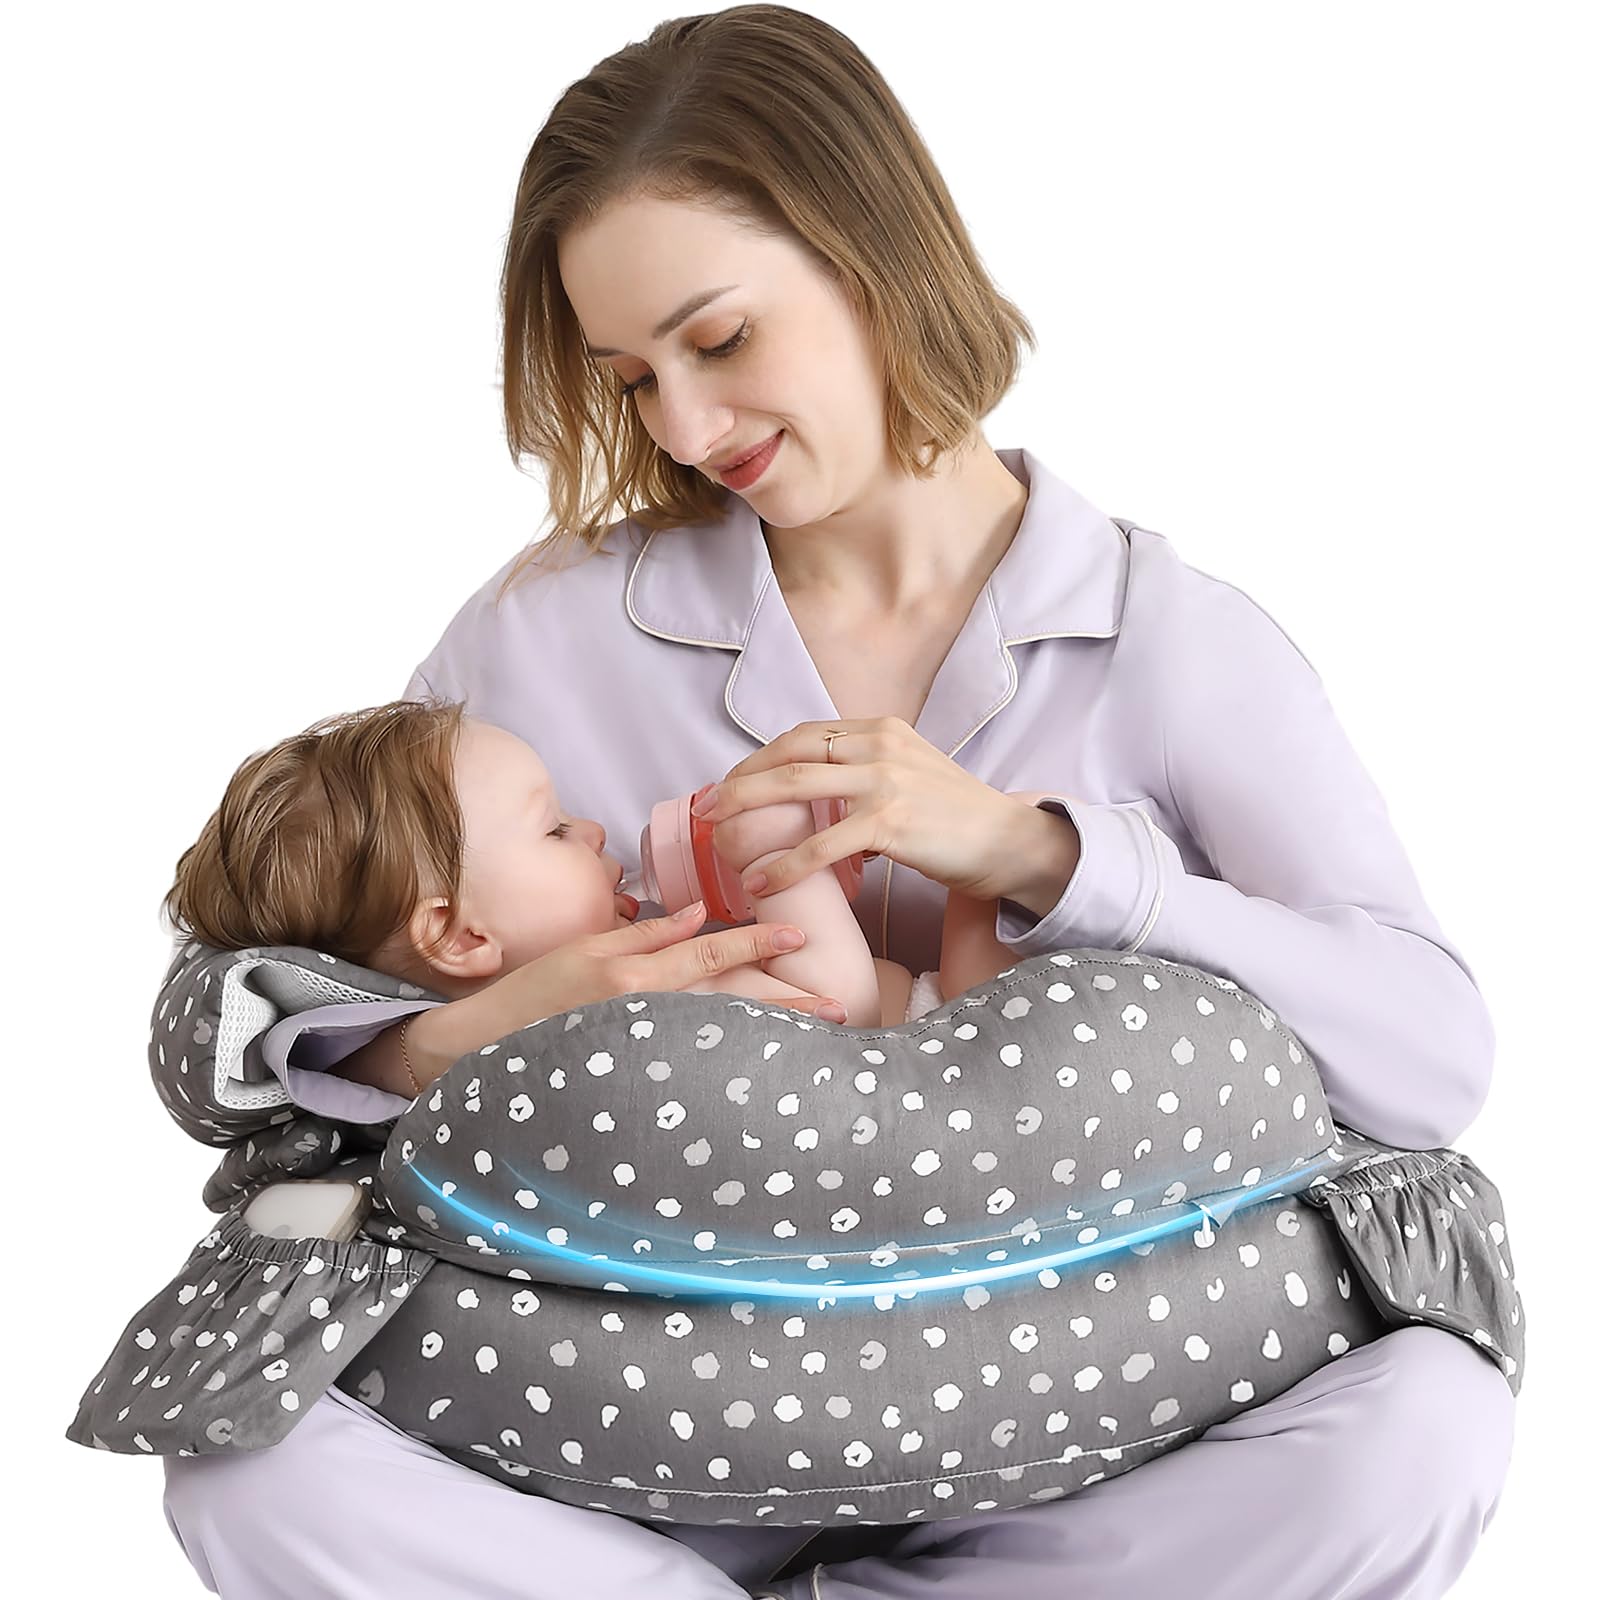 Functions of a Nursing Pillow